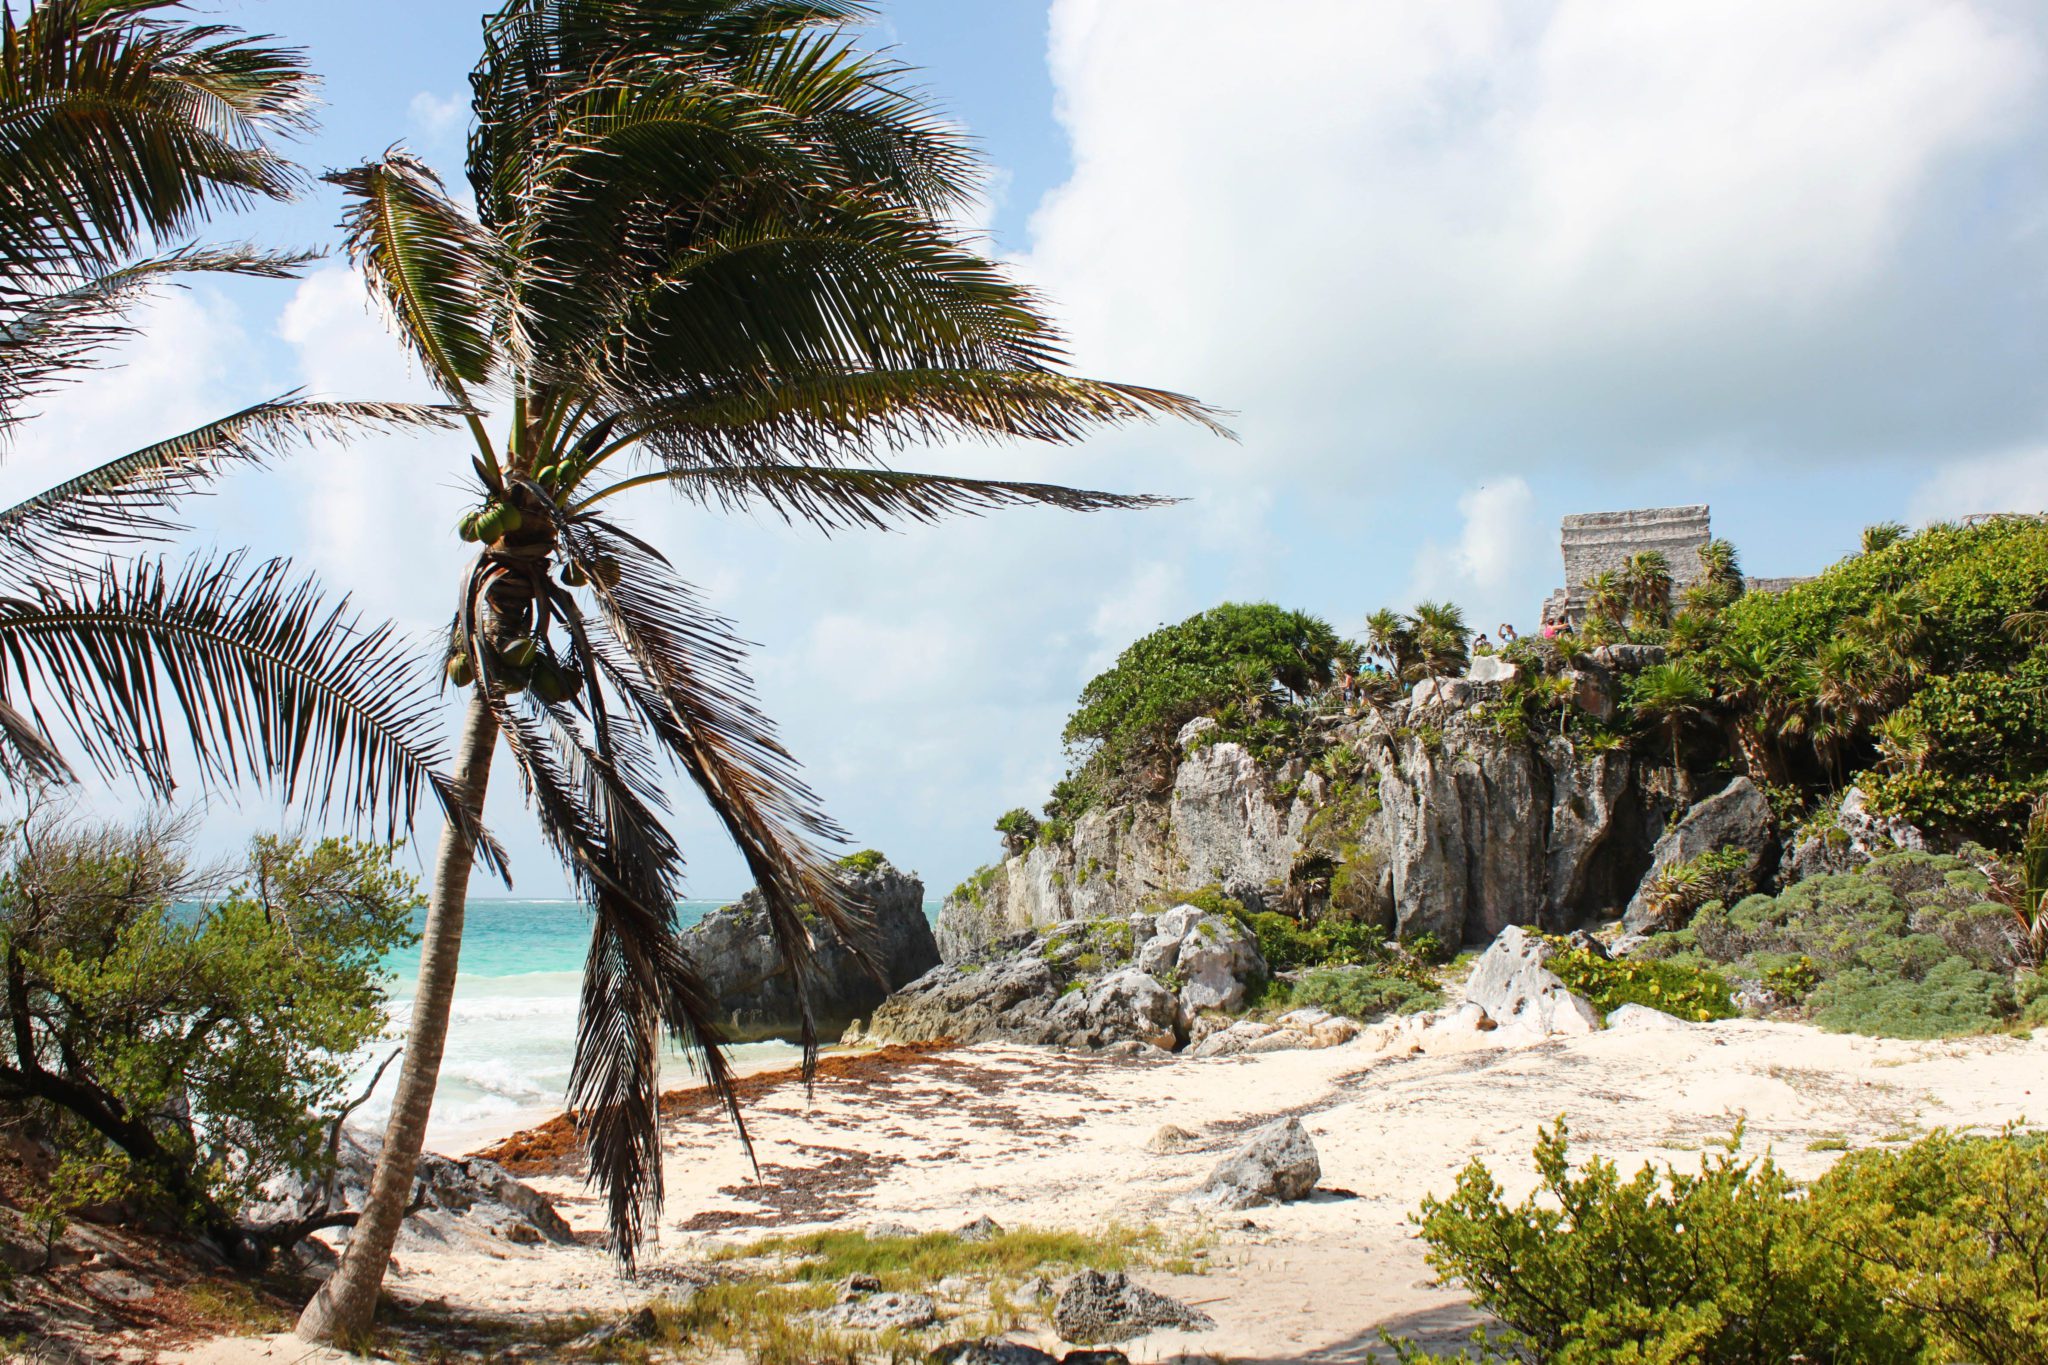 The seaside ruins of Tulum are one of the most photographed sites in Mexico- Top 7 Playa del Carmen activities #playadelcarmen #mexico #tulum